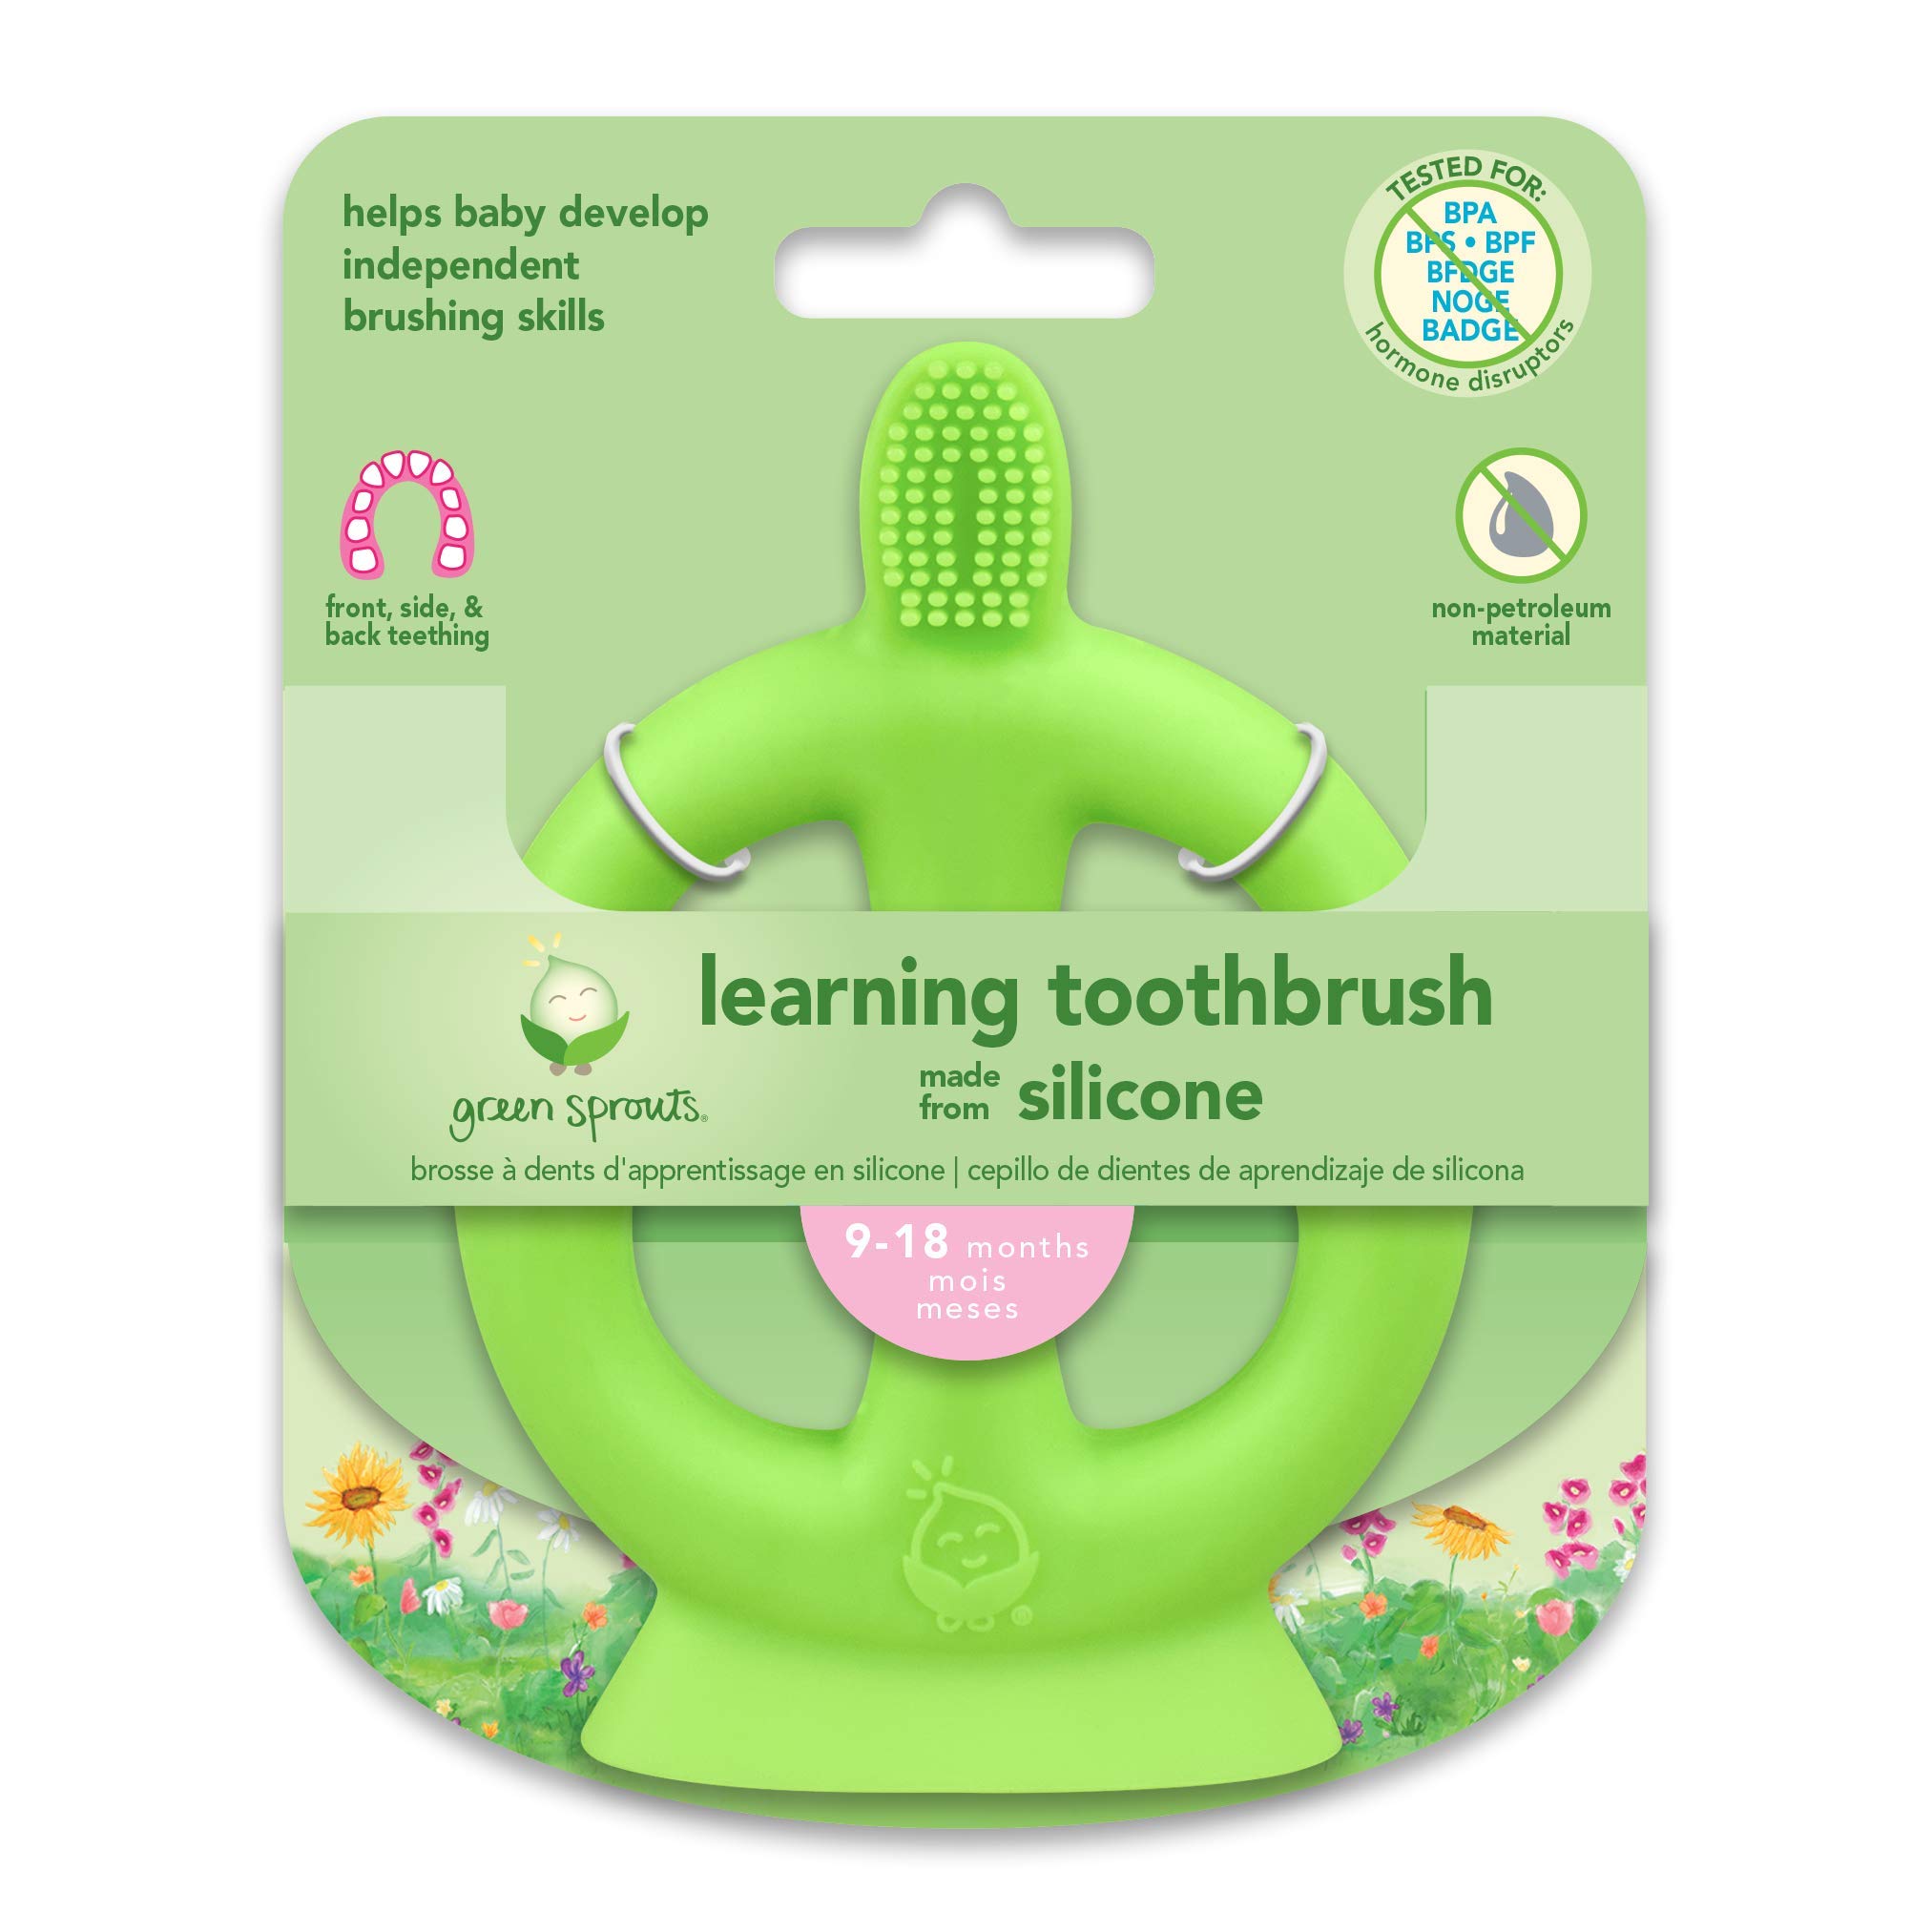 green sprouts Learning Toothbrush Made from Silicone | Toddler Training Toothbrush to Learn Brushing Skills |100% Food-Grade LFGB Silicone Without BPA, BPS, BPF | Sterilizer Safe, Green